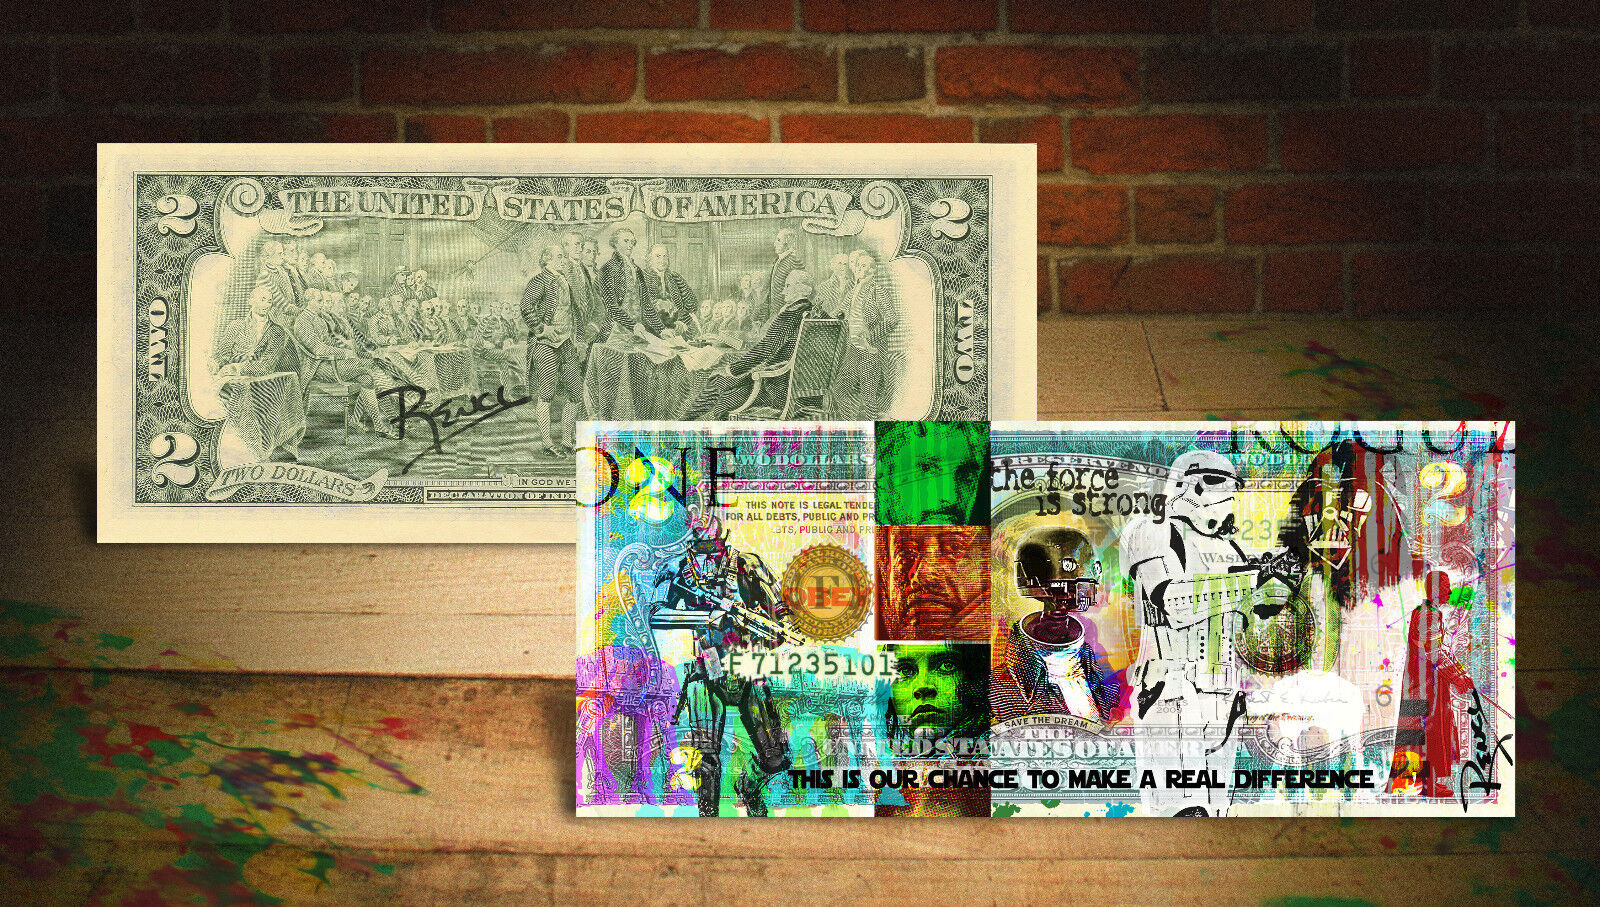 ROGUE ONE - A STAR WARS STORY Genuine U.S. $2 Bill HAND-SIGNED by Rency - Banksy